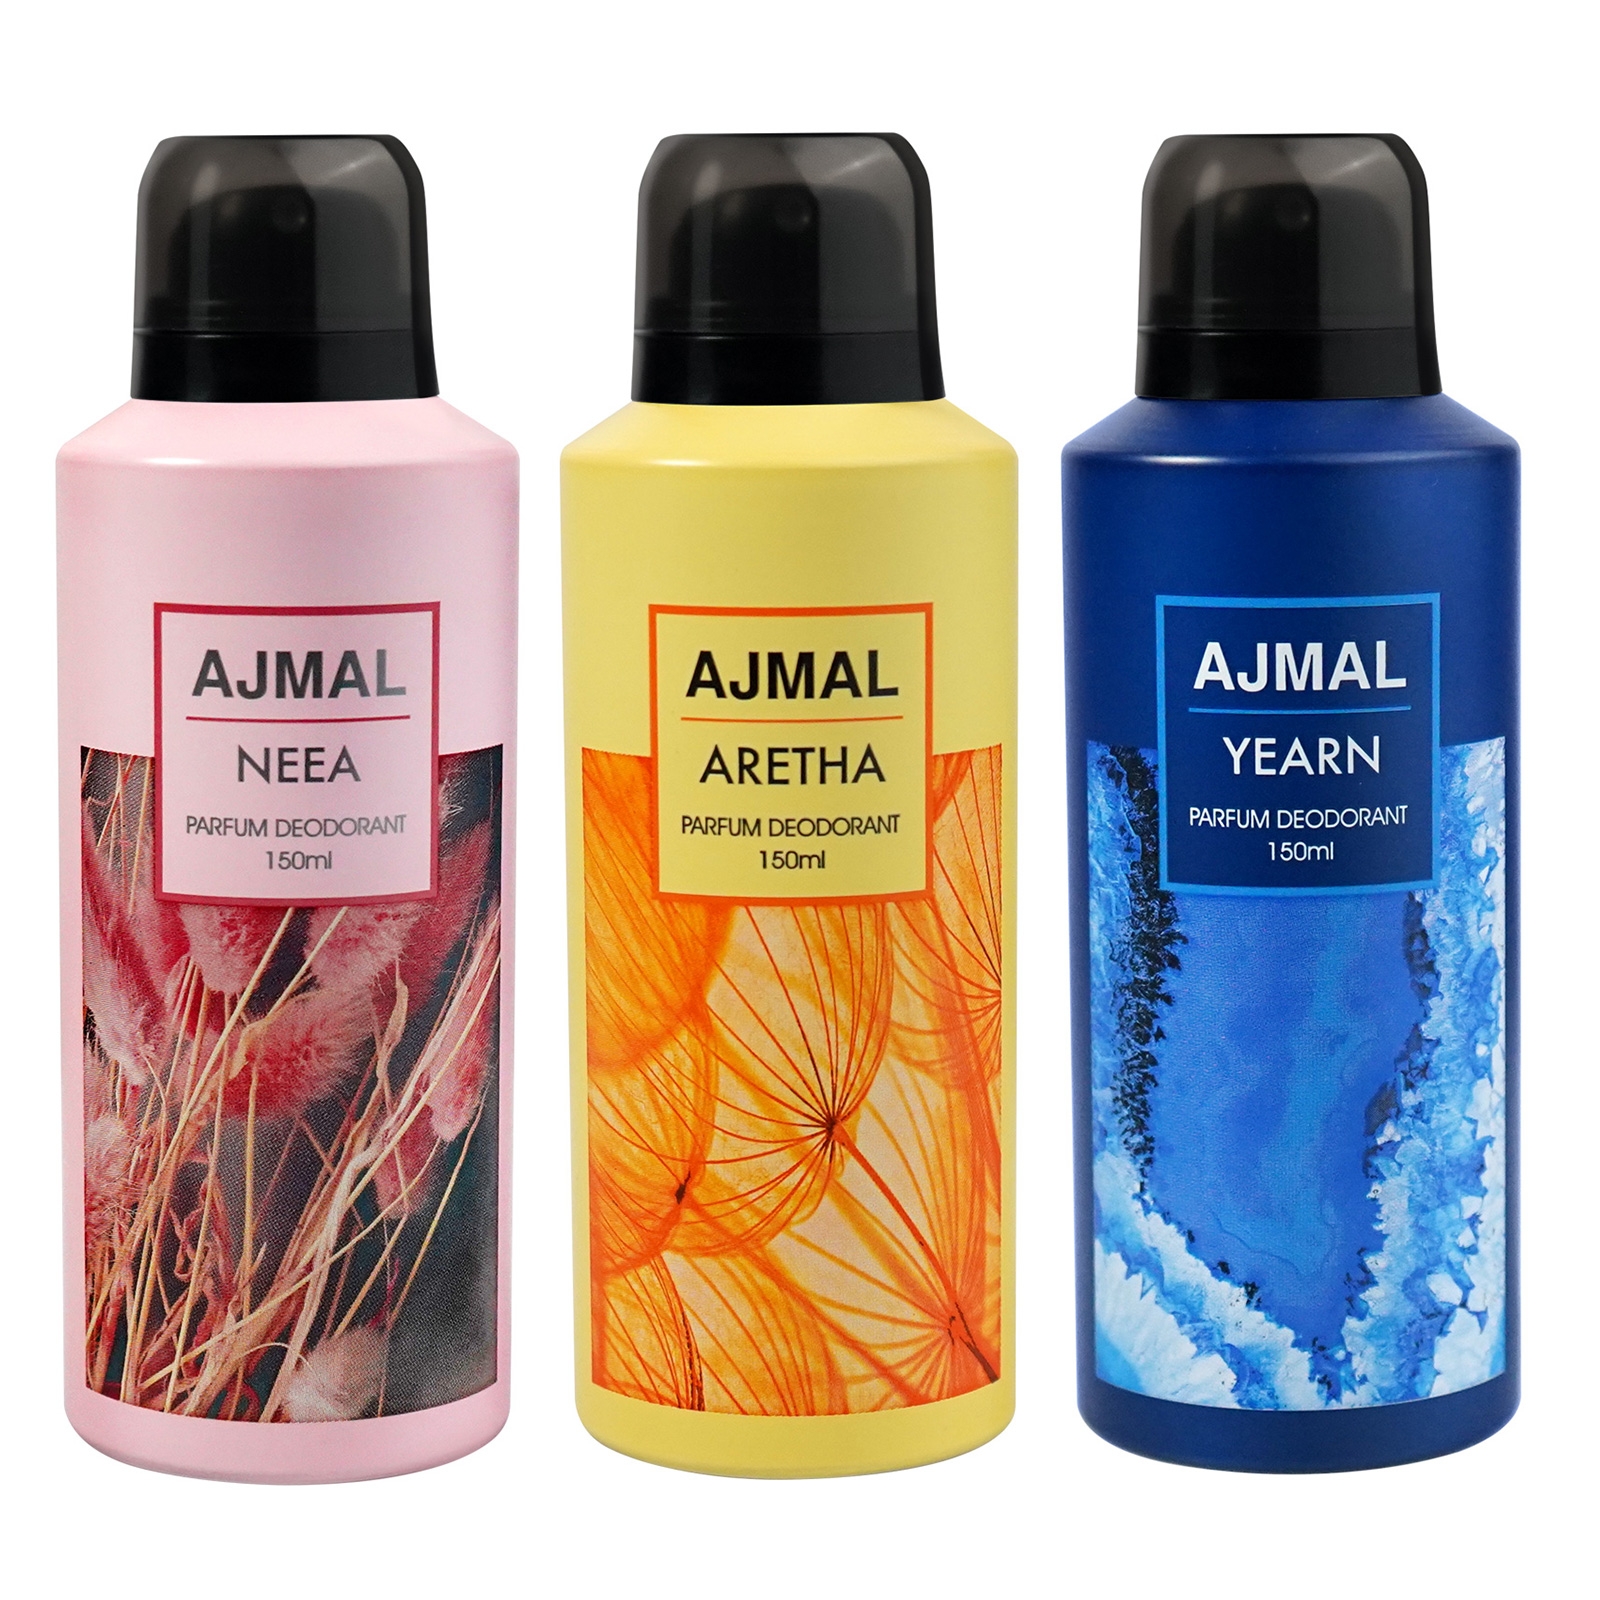 Ajmal Neea, Aretha and Yearn Deodorant Perfume 150ML Each Long Lasting Spray Party Wear Gift For Men and Women Online Exclusive